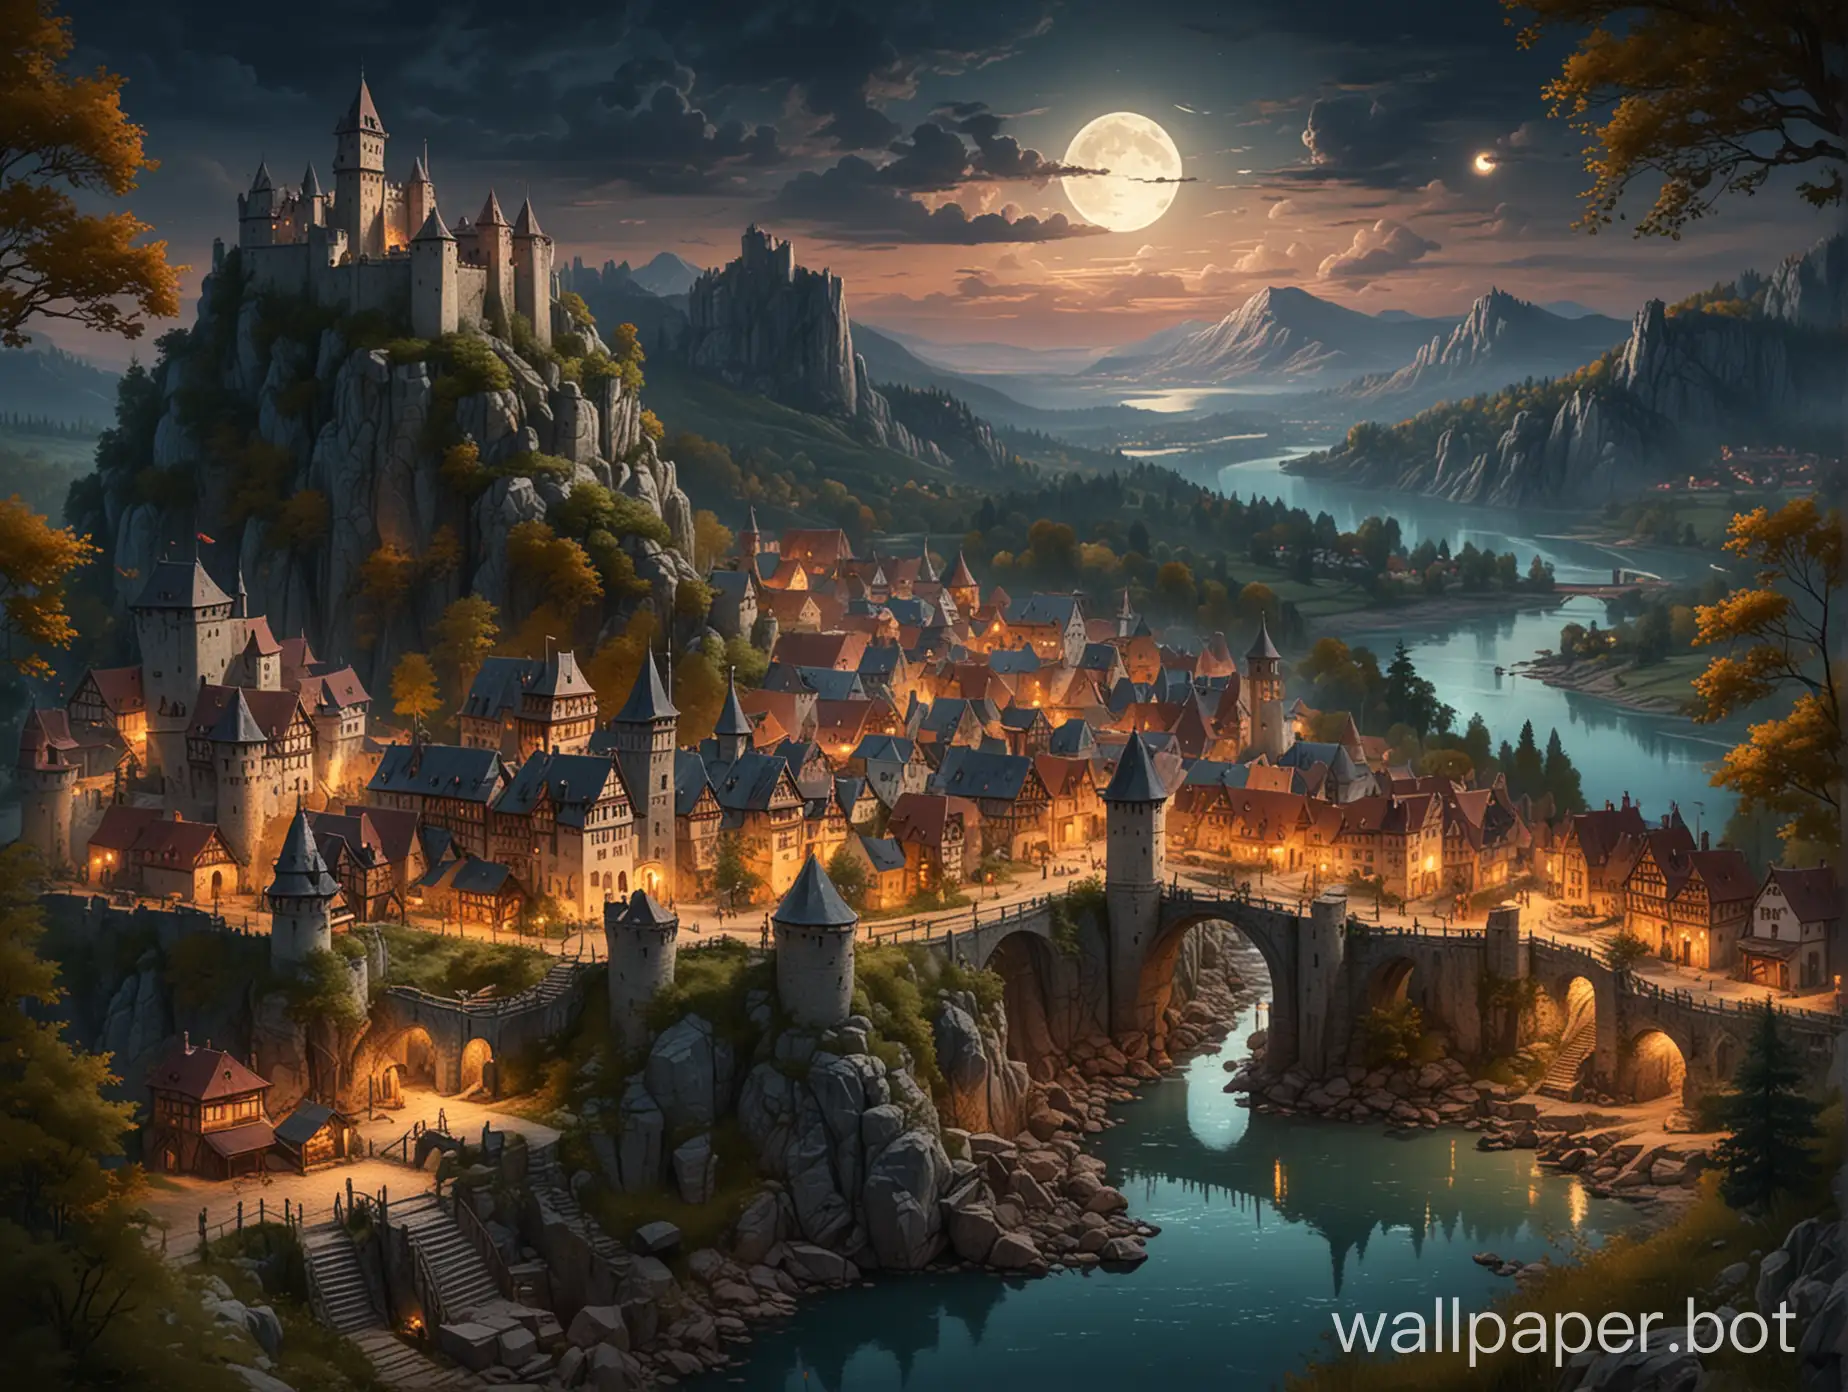 Fantasy-Medieval-Village-on-Meadow-with-Mountain-Landscape